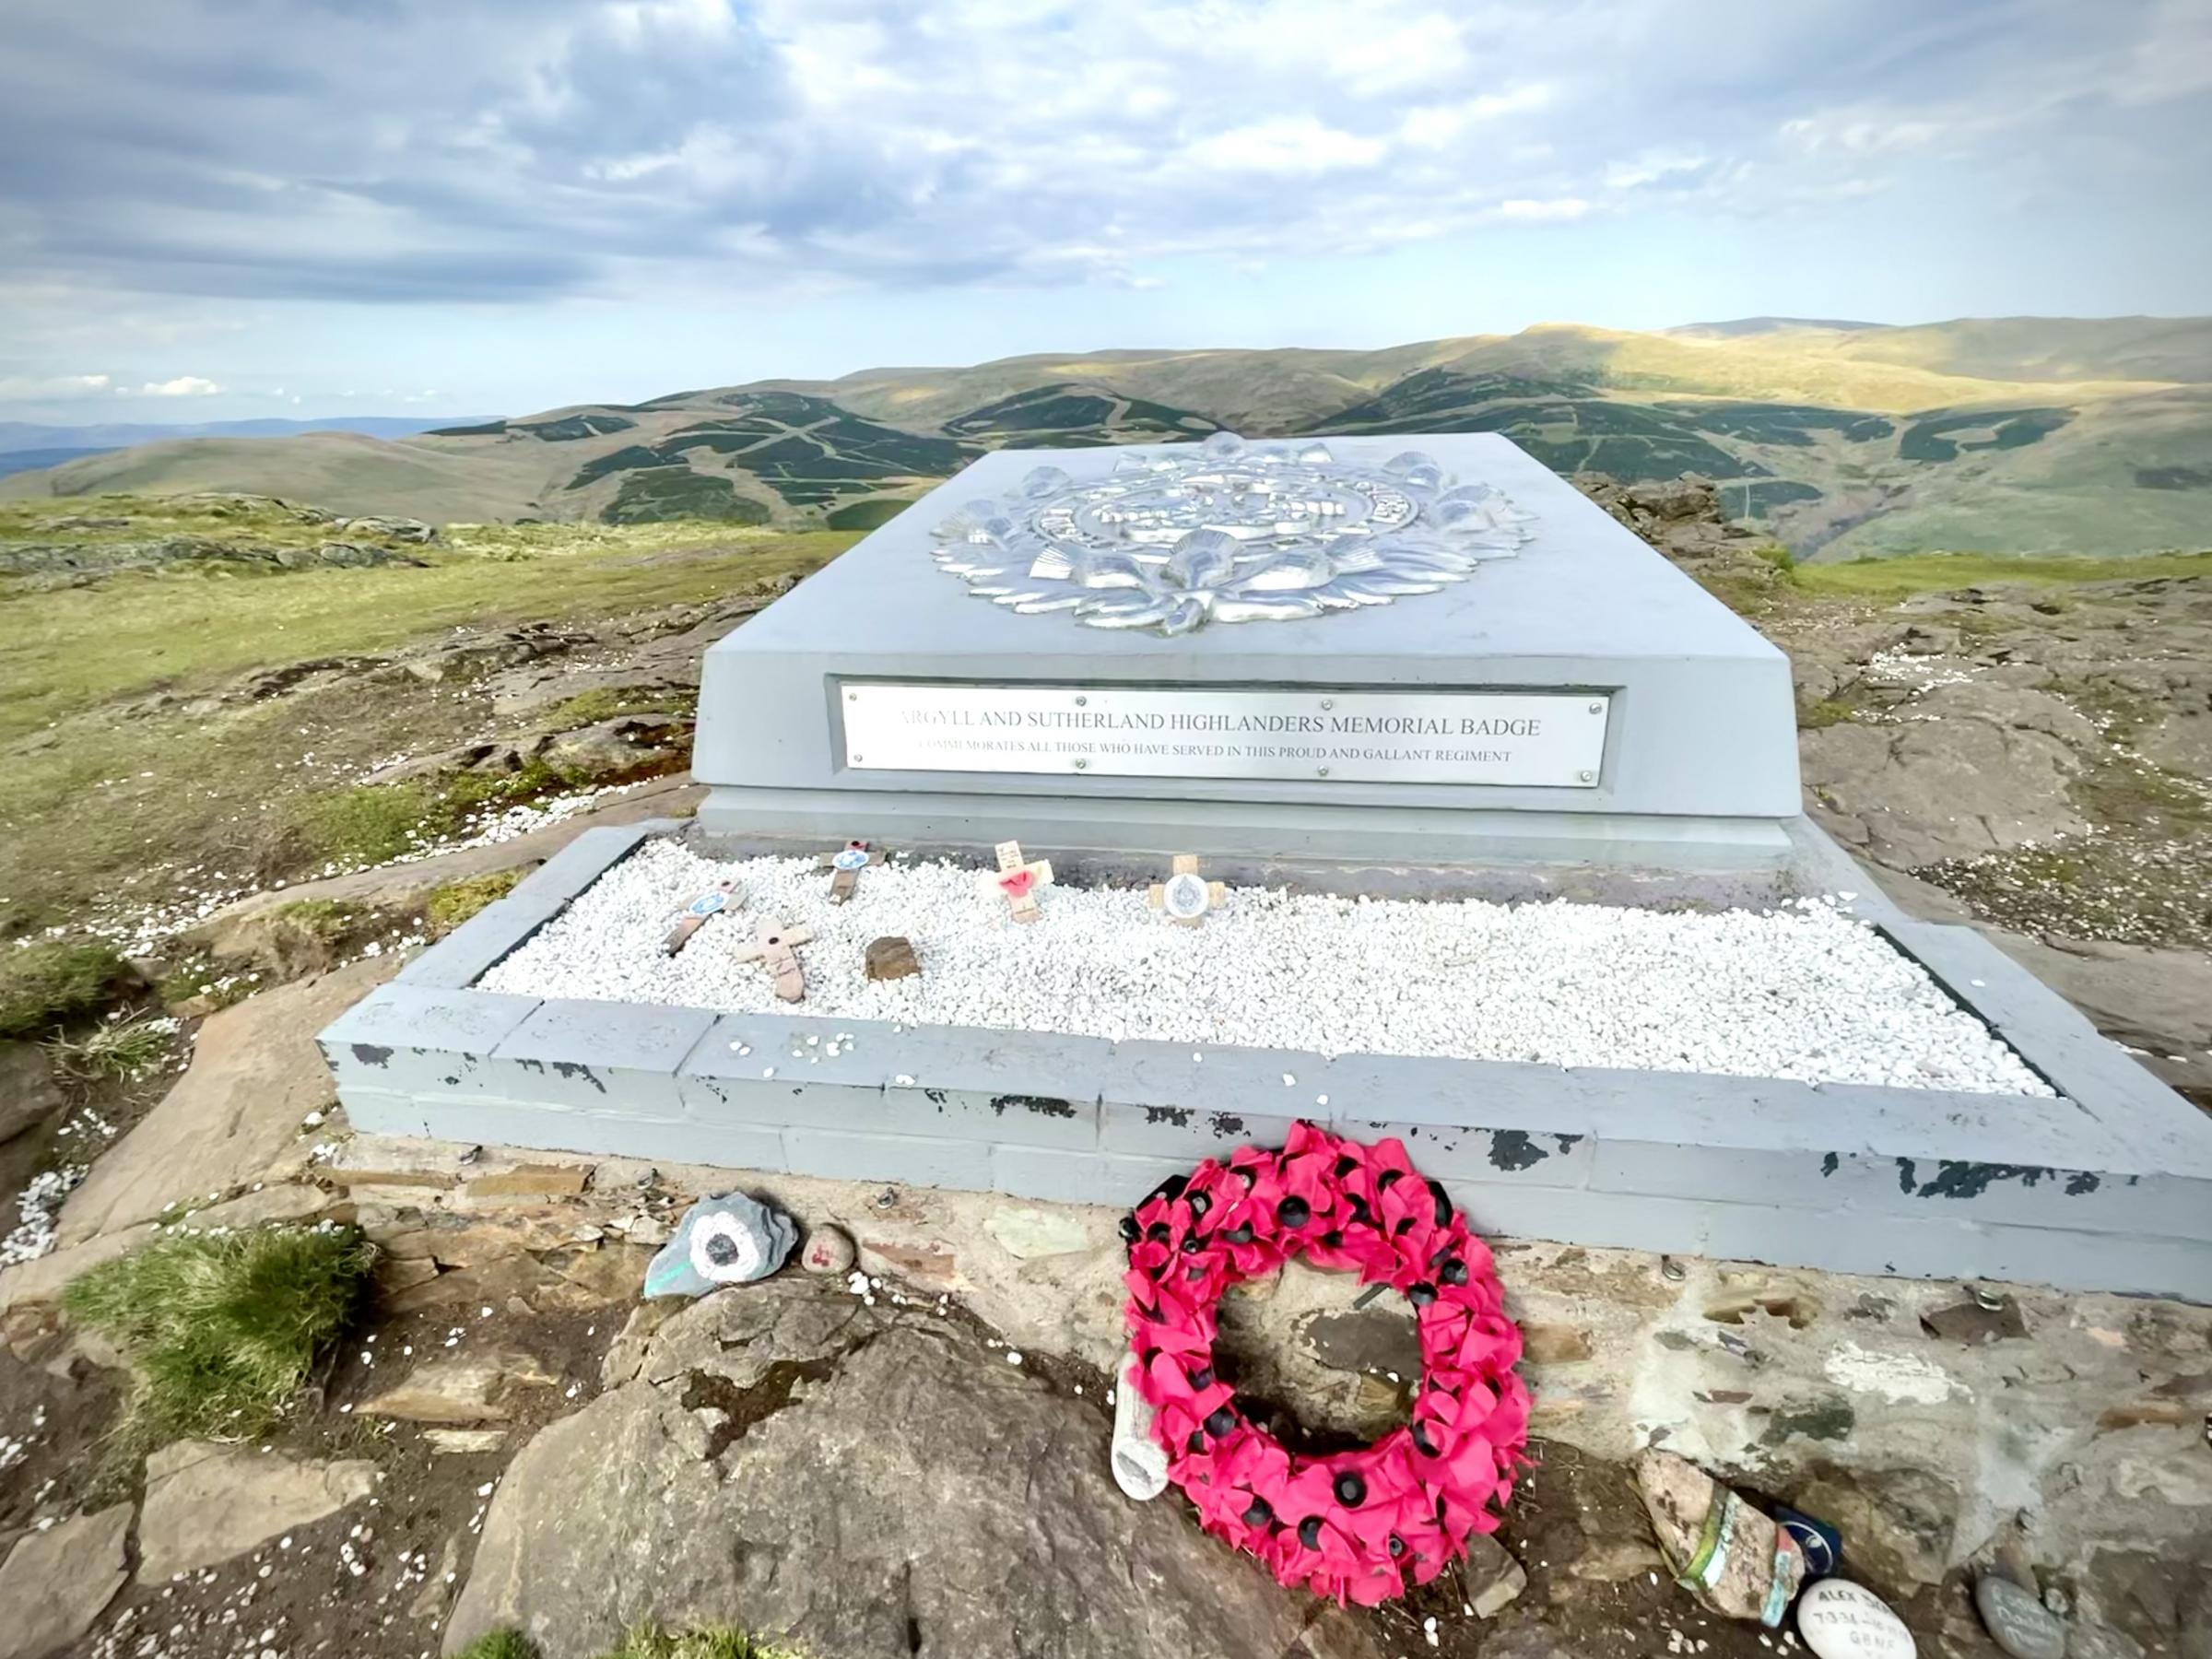 The Argylls memorial atop Dumyat was a real source of pride for David